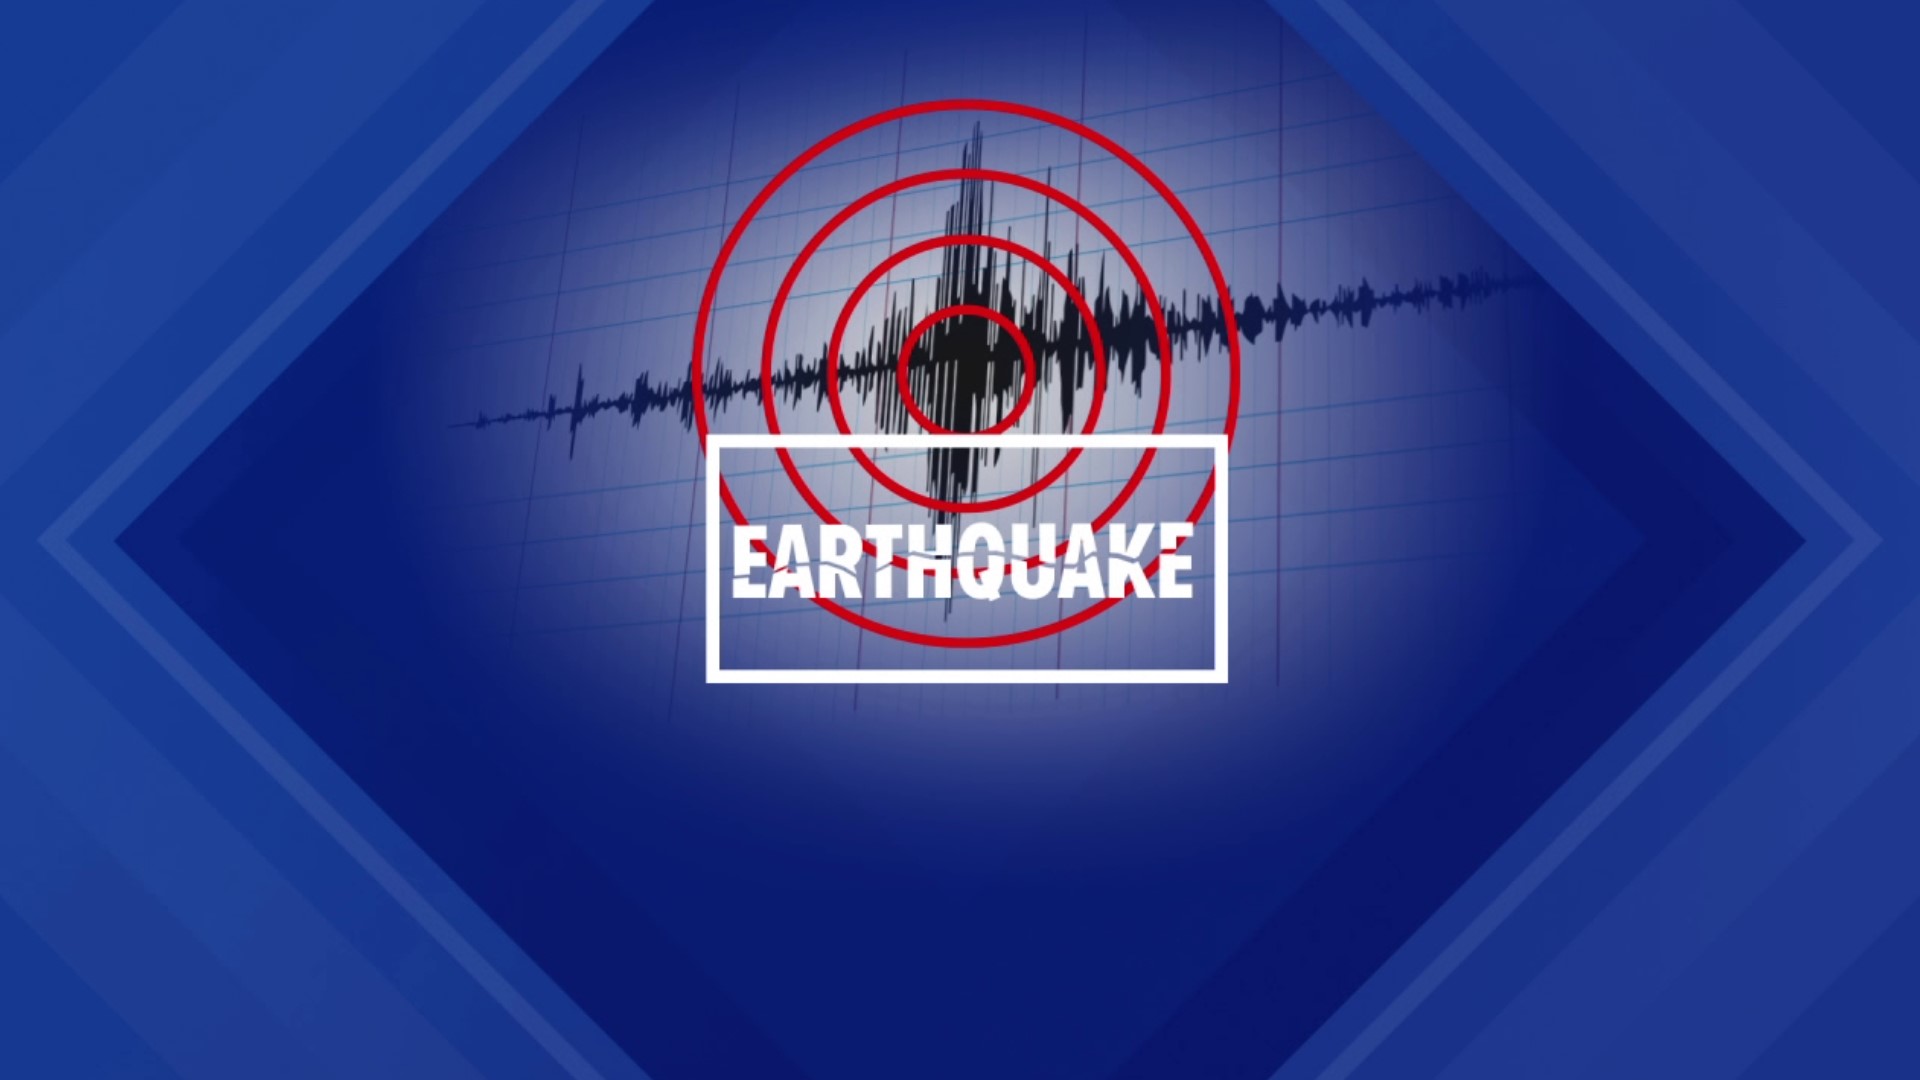 4.8 magnitude earthquake felt in PA, Newswatch 16's Ally Gallo has some more details.